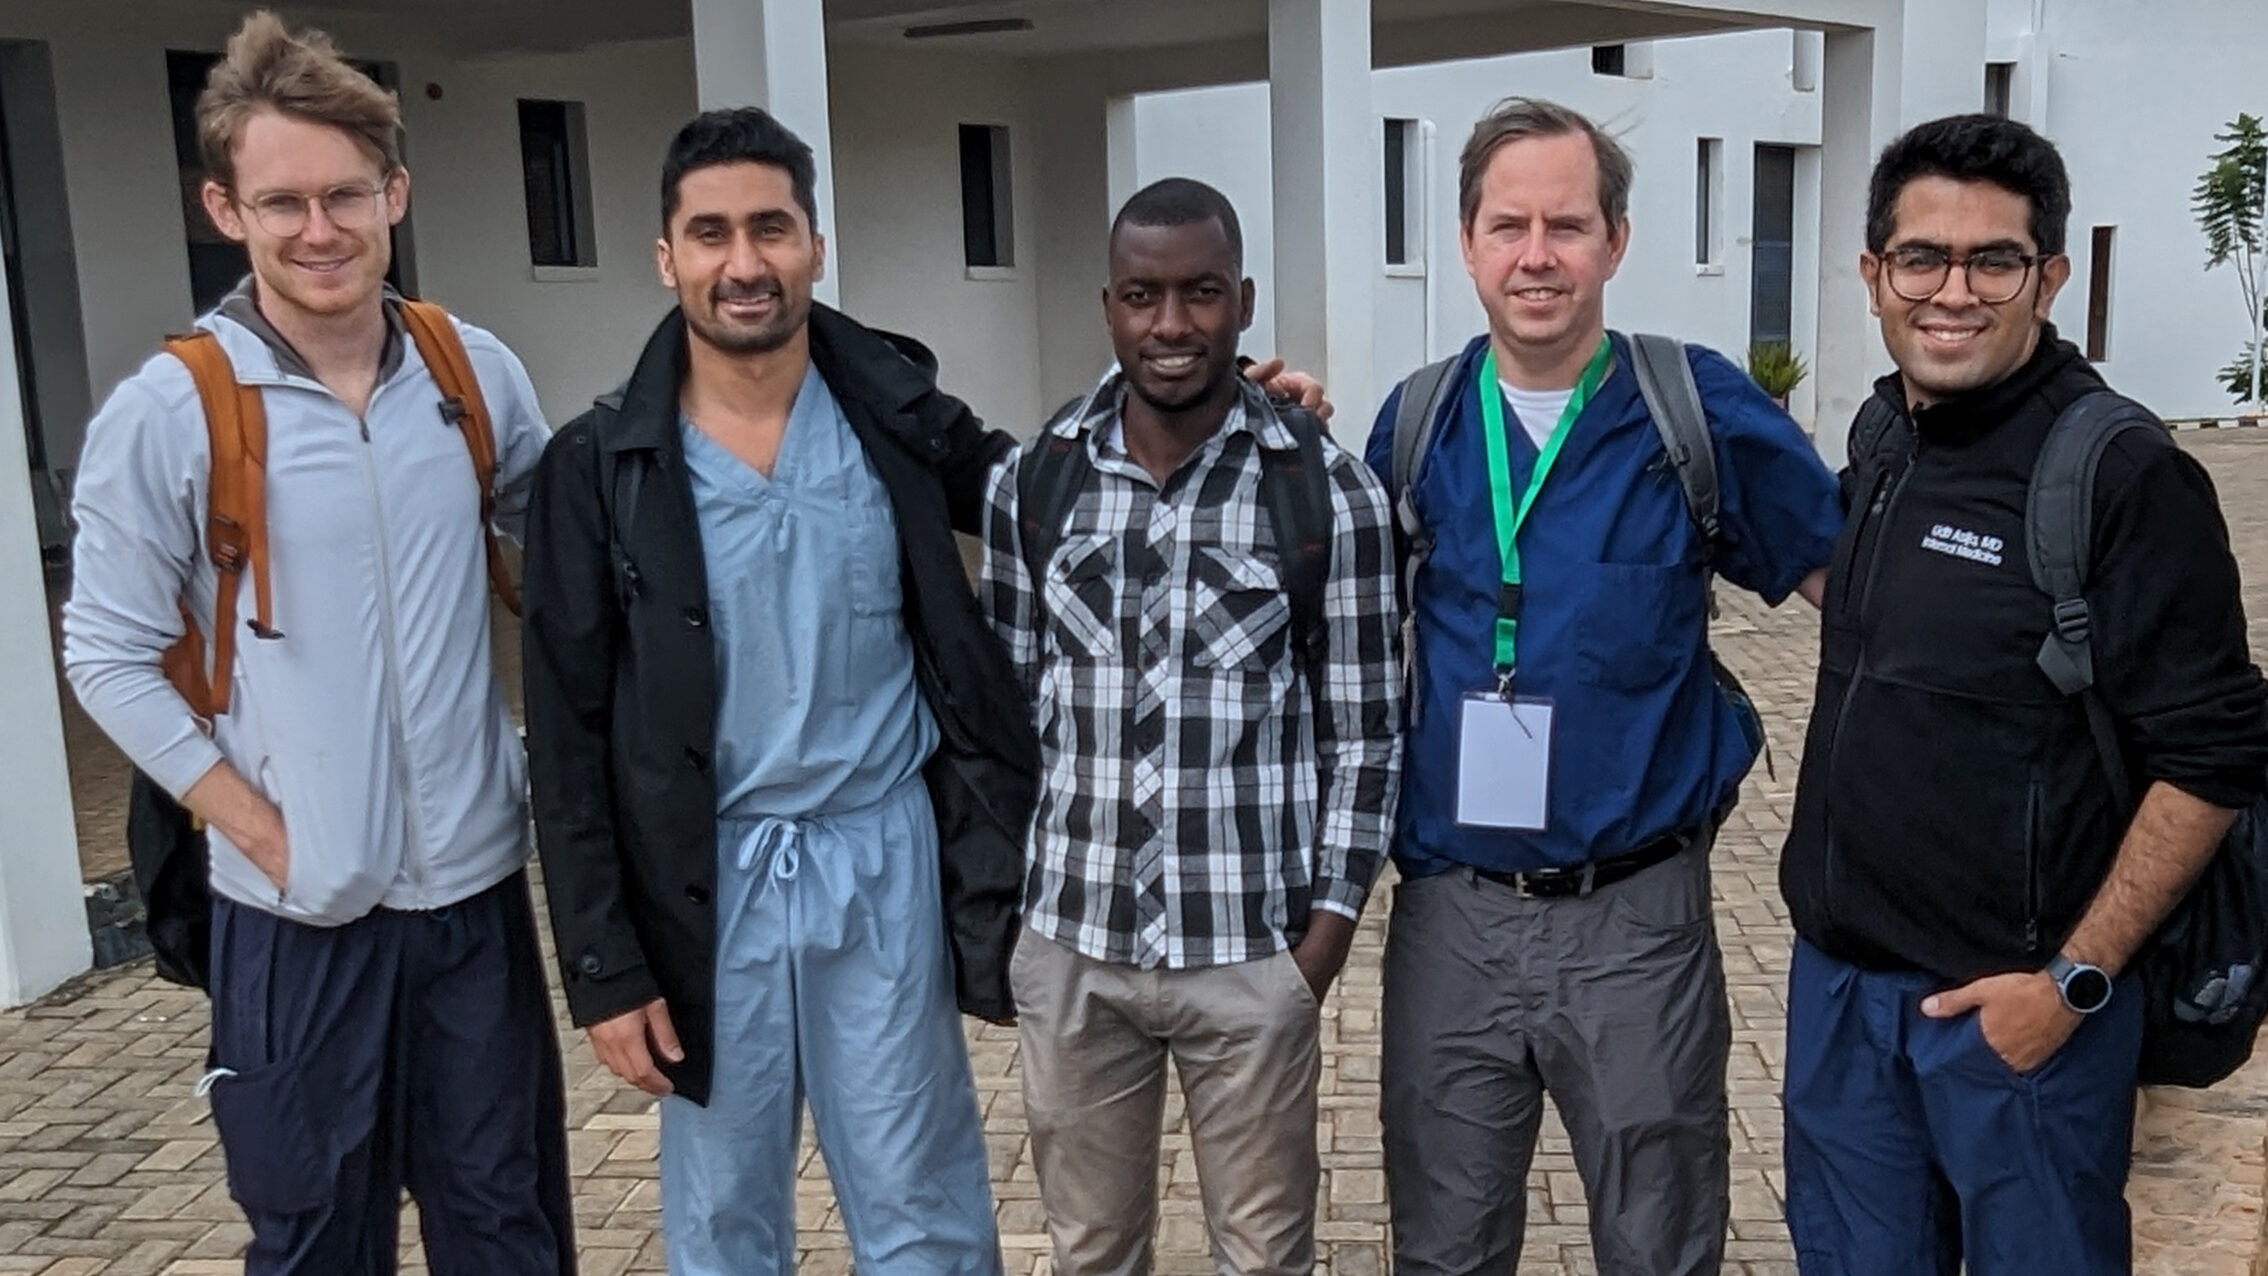 Wright Center Internal Medicine Resident Dr. Udit Asija with several colleagues at the Munini District Hospital in Rwanda